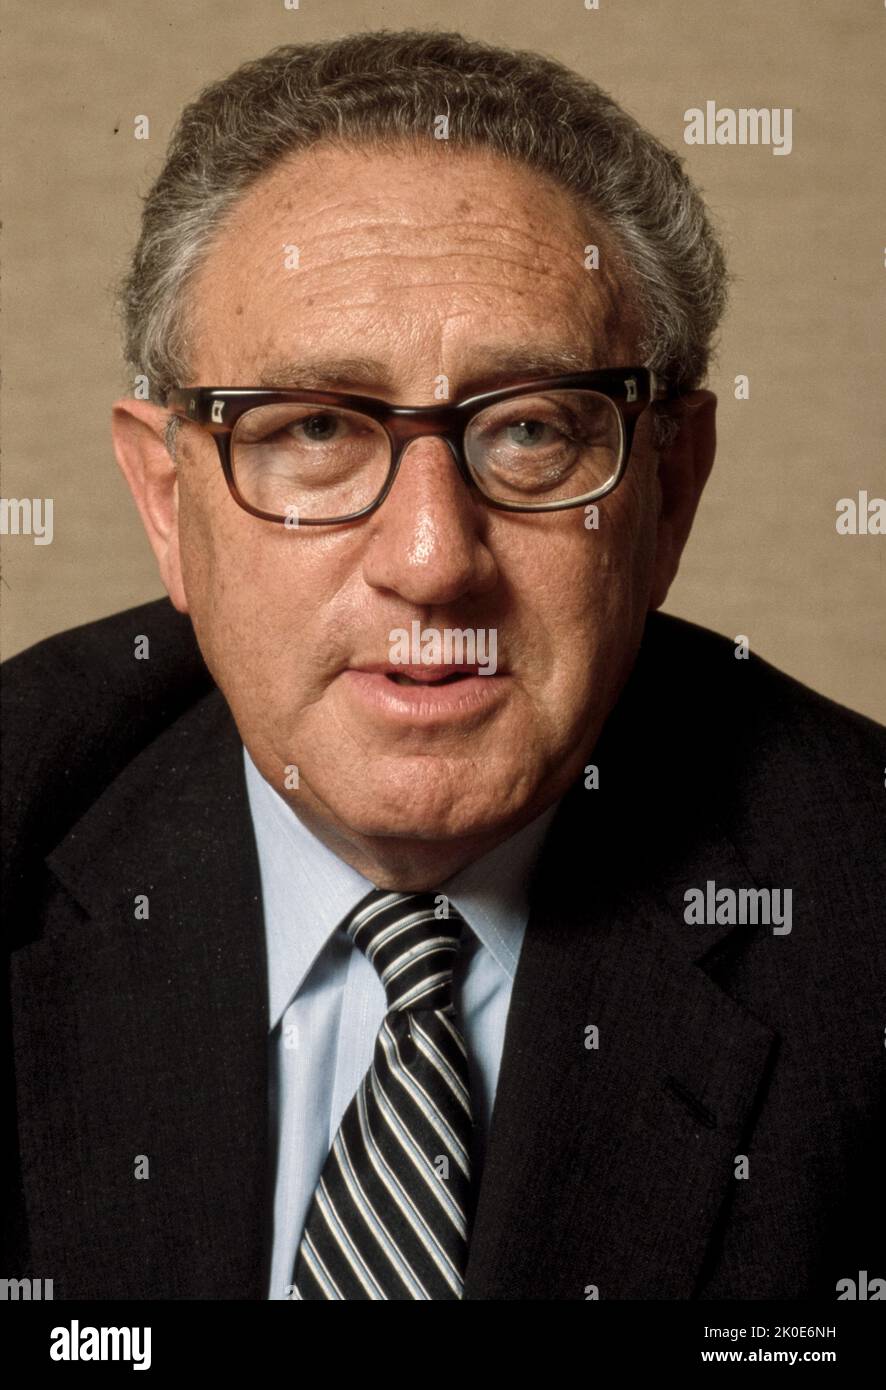 Henry Alfred Kissinger (born 1923), American politician, diplomat, and geopolitical consultant who served as United States Secretary of State and National Security Advisor under the presidential administrations of Richard Nixon and Gerald Ford. A Jewish refugee who fled Nazi Germany with his family in 1938, he became National Security Advisor in 1969 and U.S. Secretary of State in 1973. For his actions negotiating a ceasefire in Vietnam, Kissinger received the 1973 Nobel Peace Prize. Stock Photo